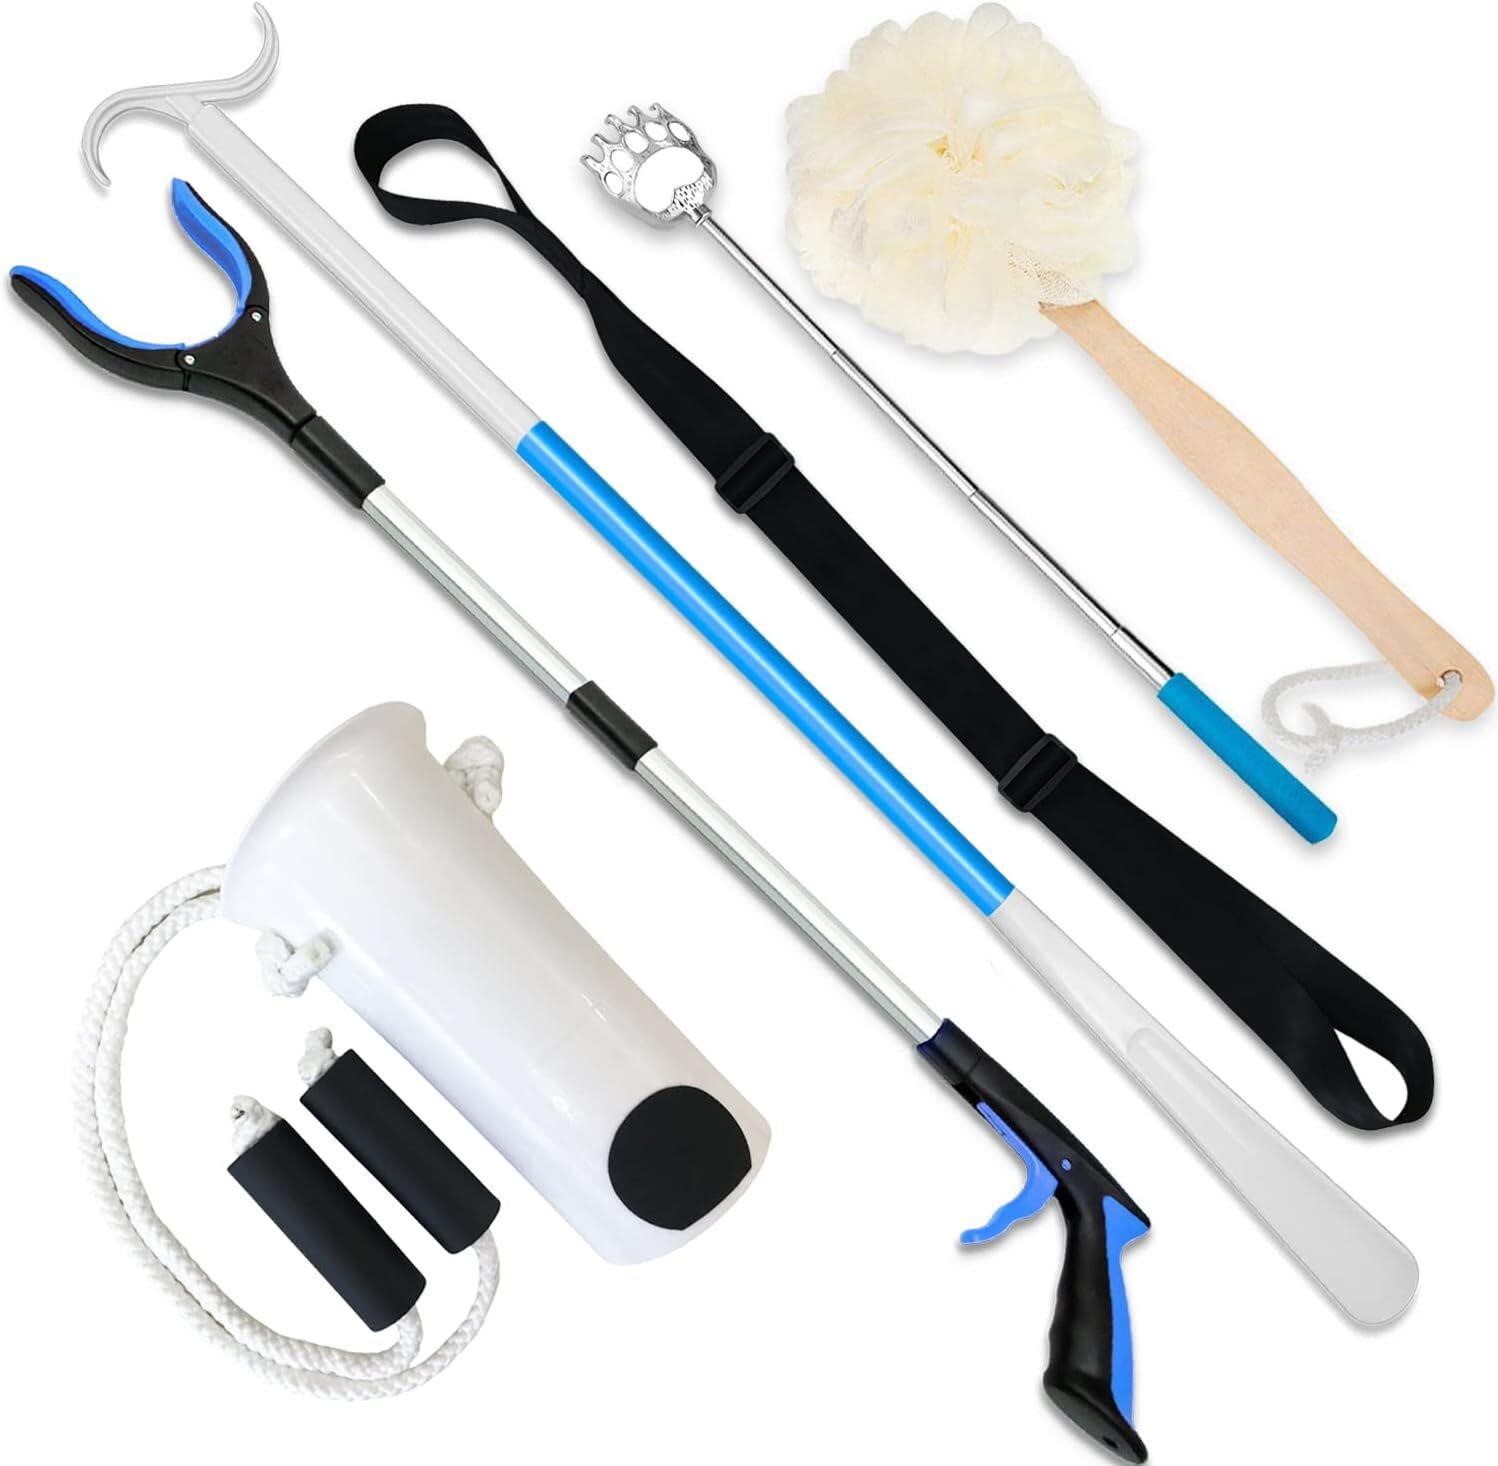 Hip Kit - Surgery Aid  Shoehorn & More